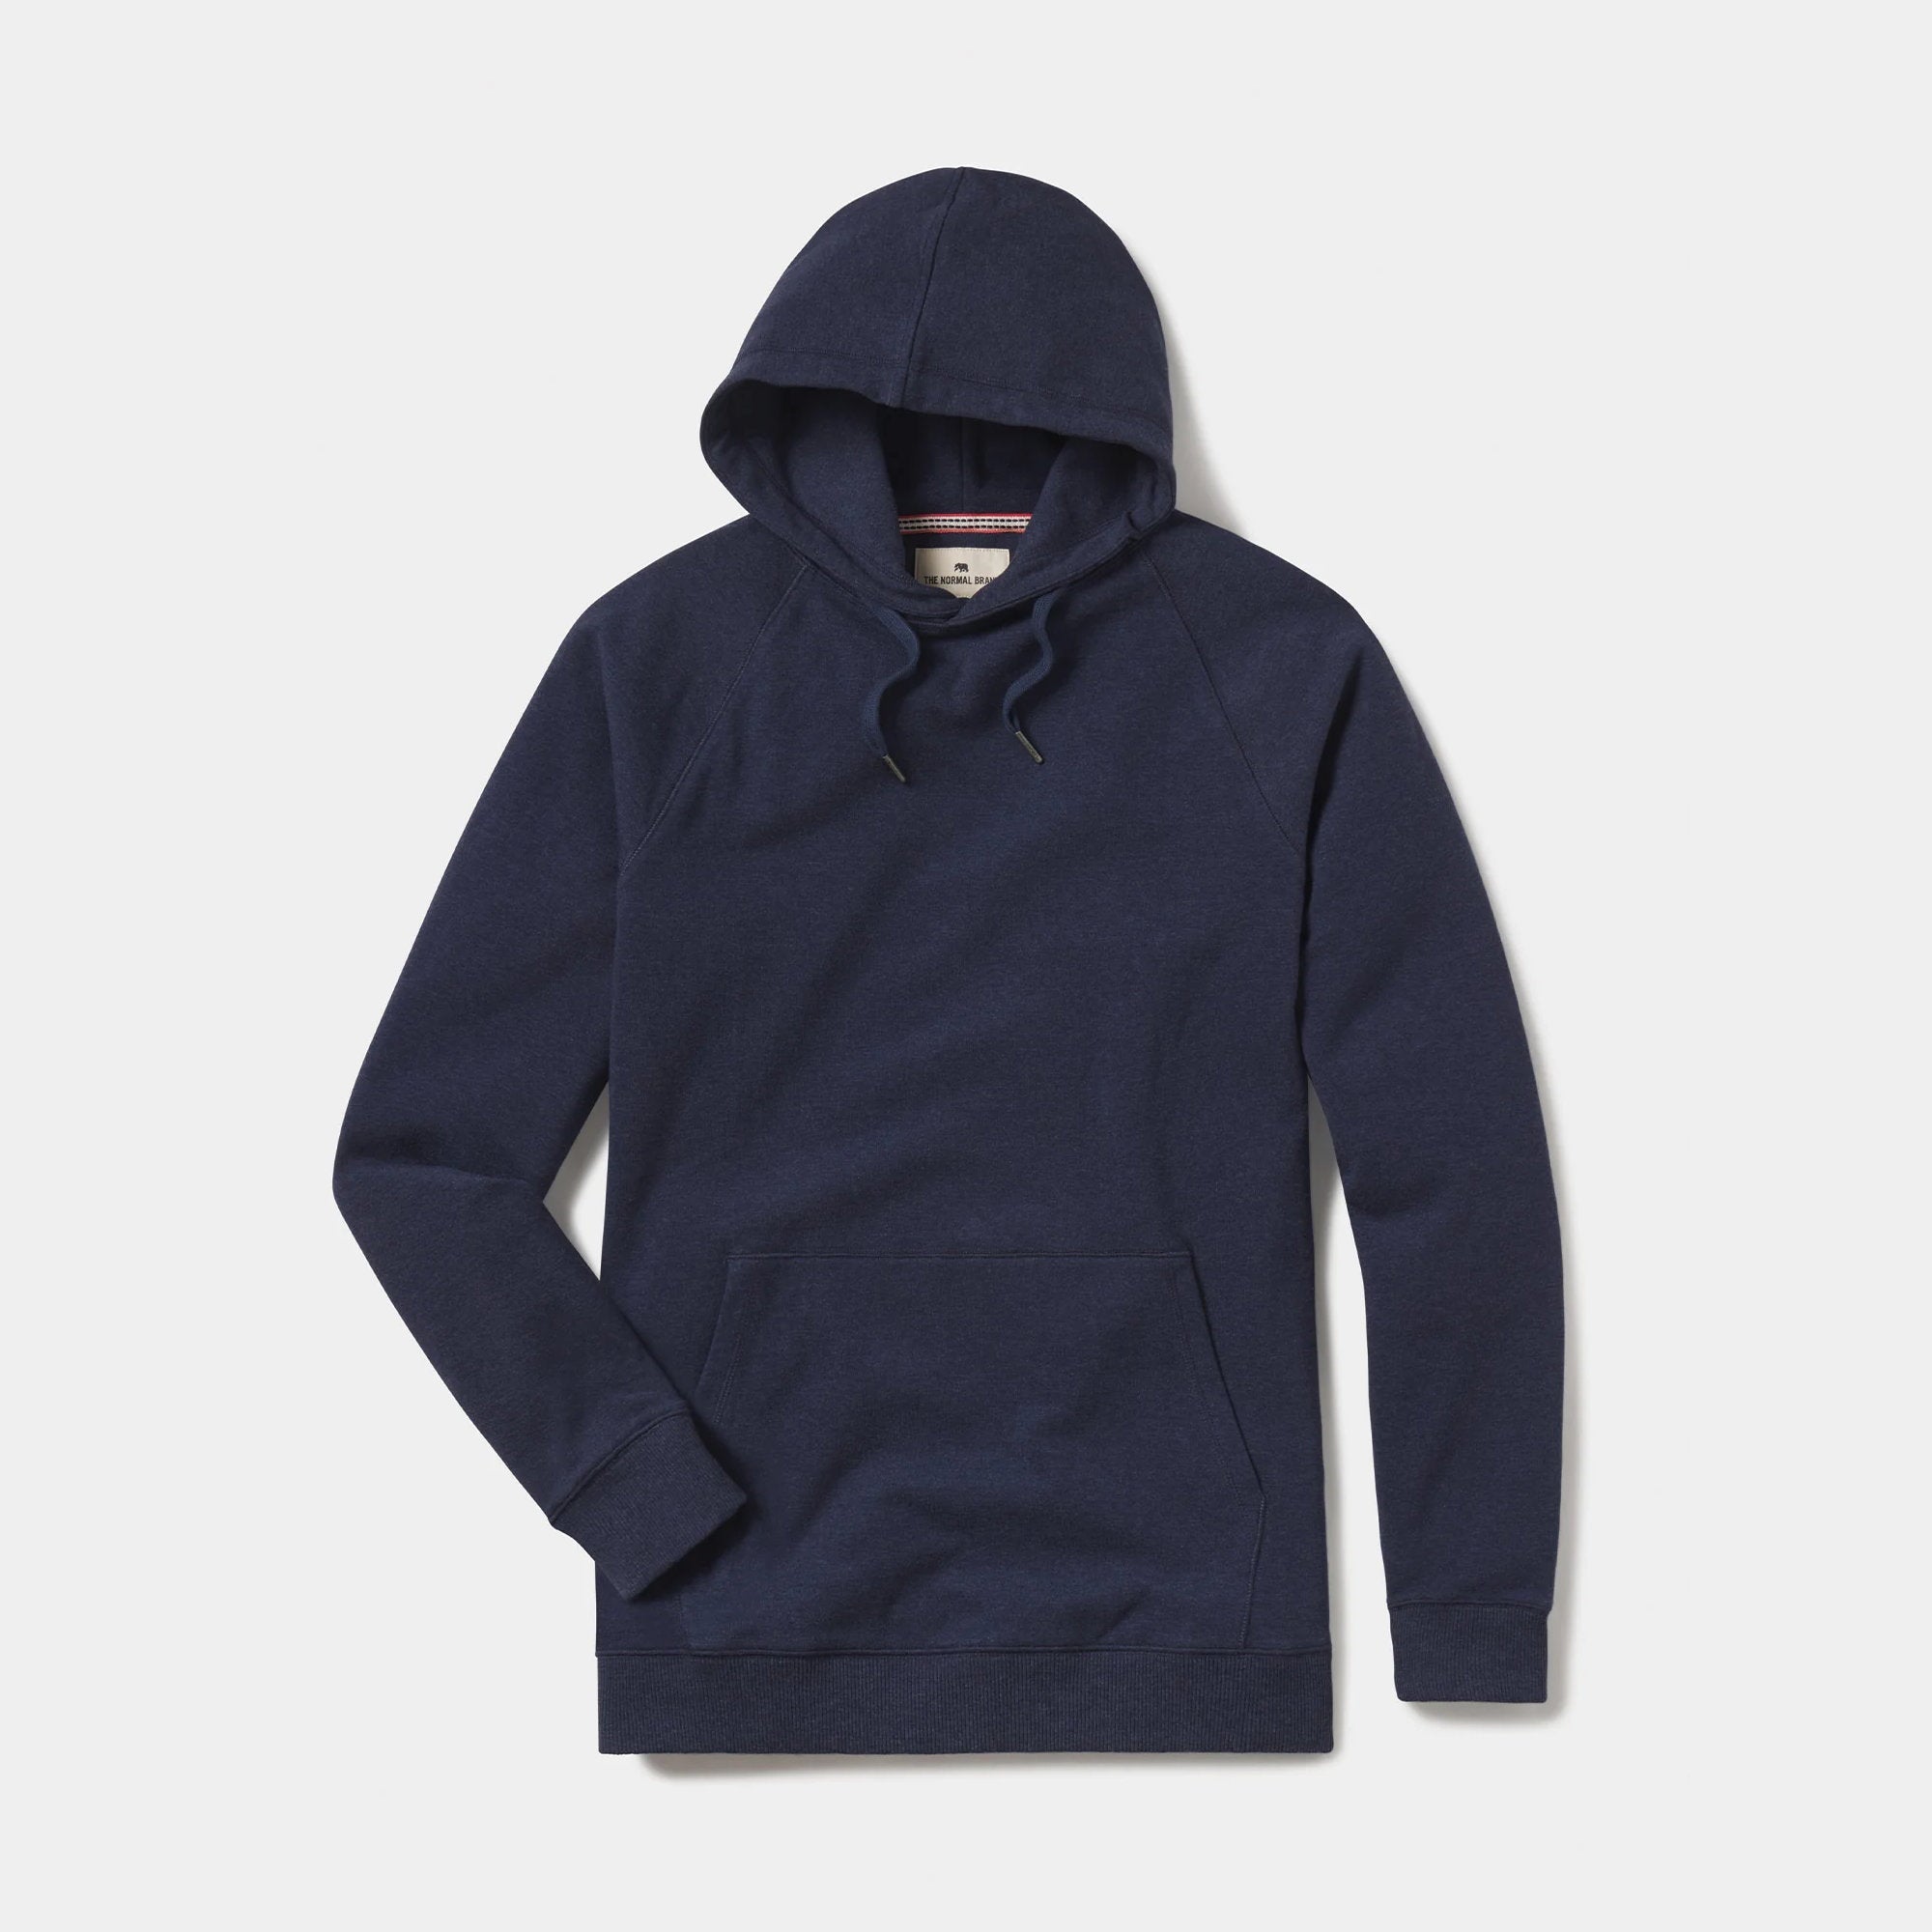 'The Normal Brand Puremeso Weekend Hoodie' in 'Navy' colour